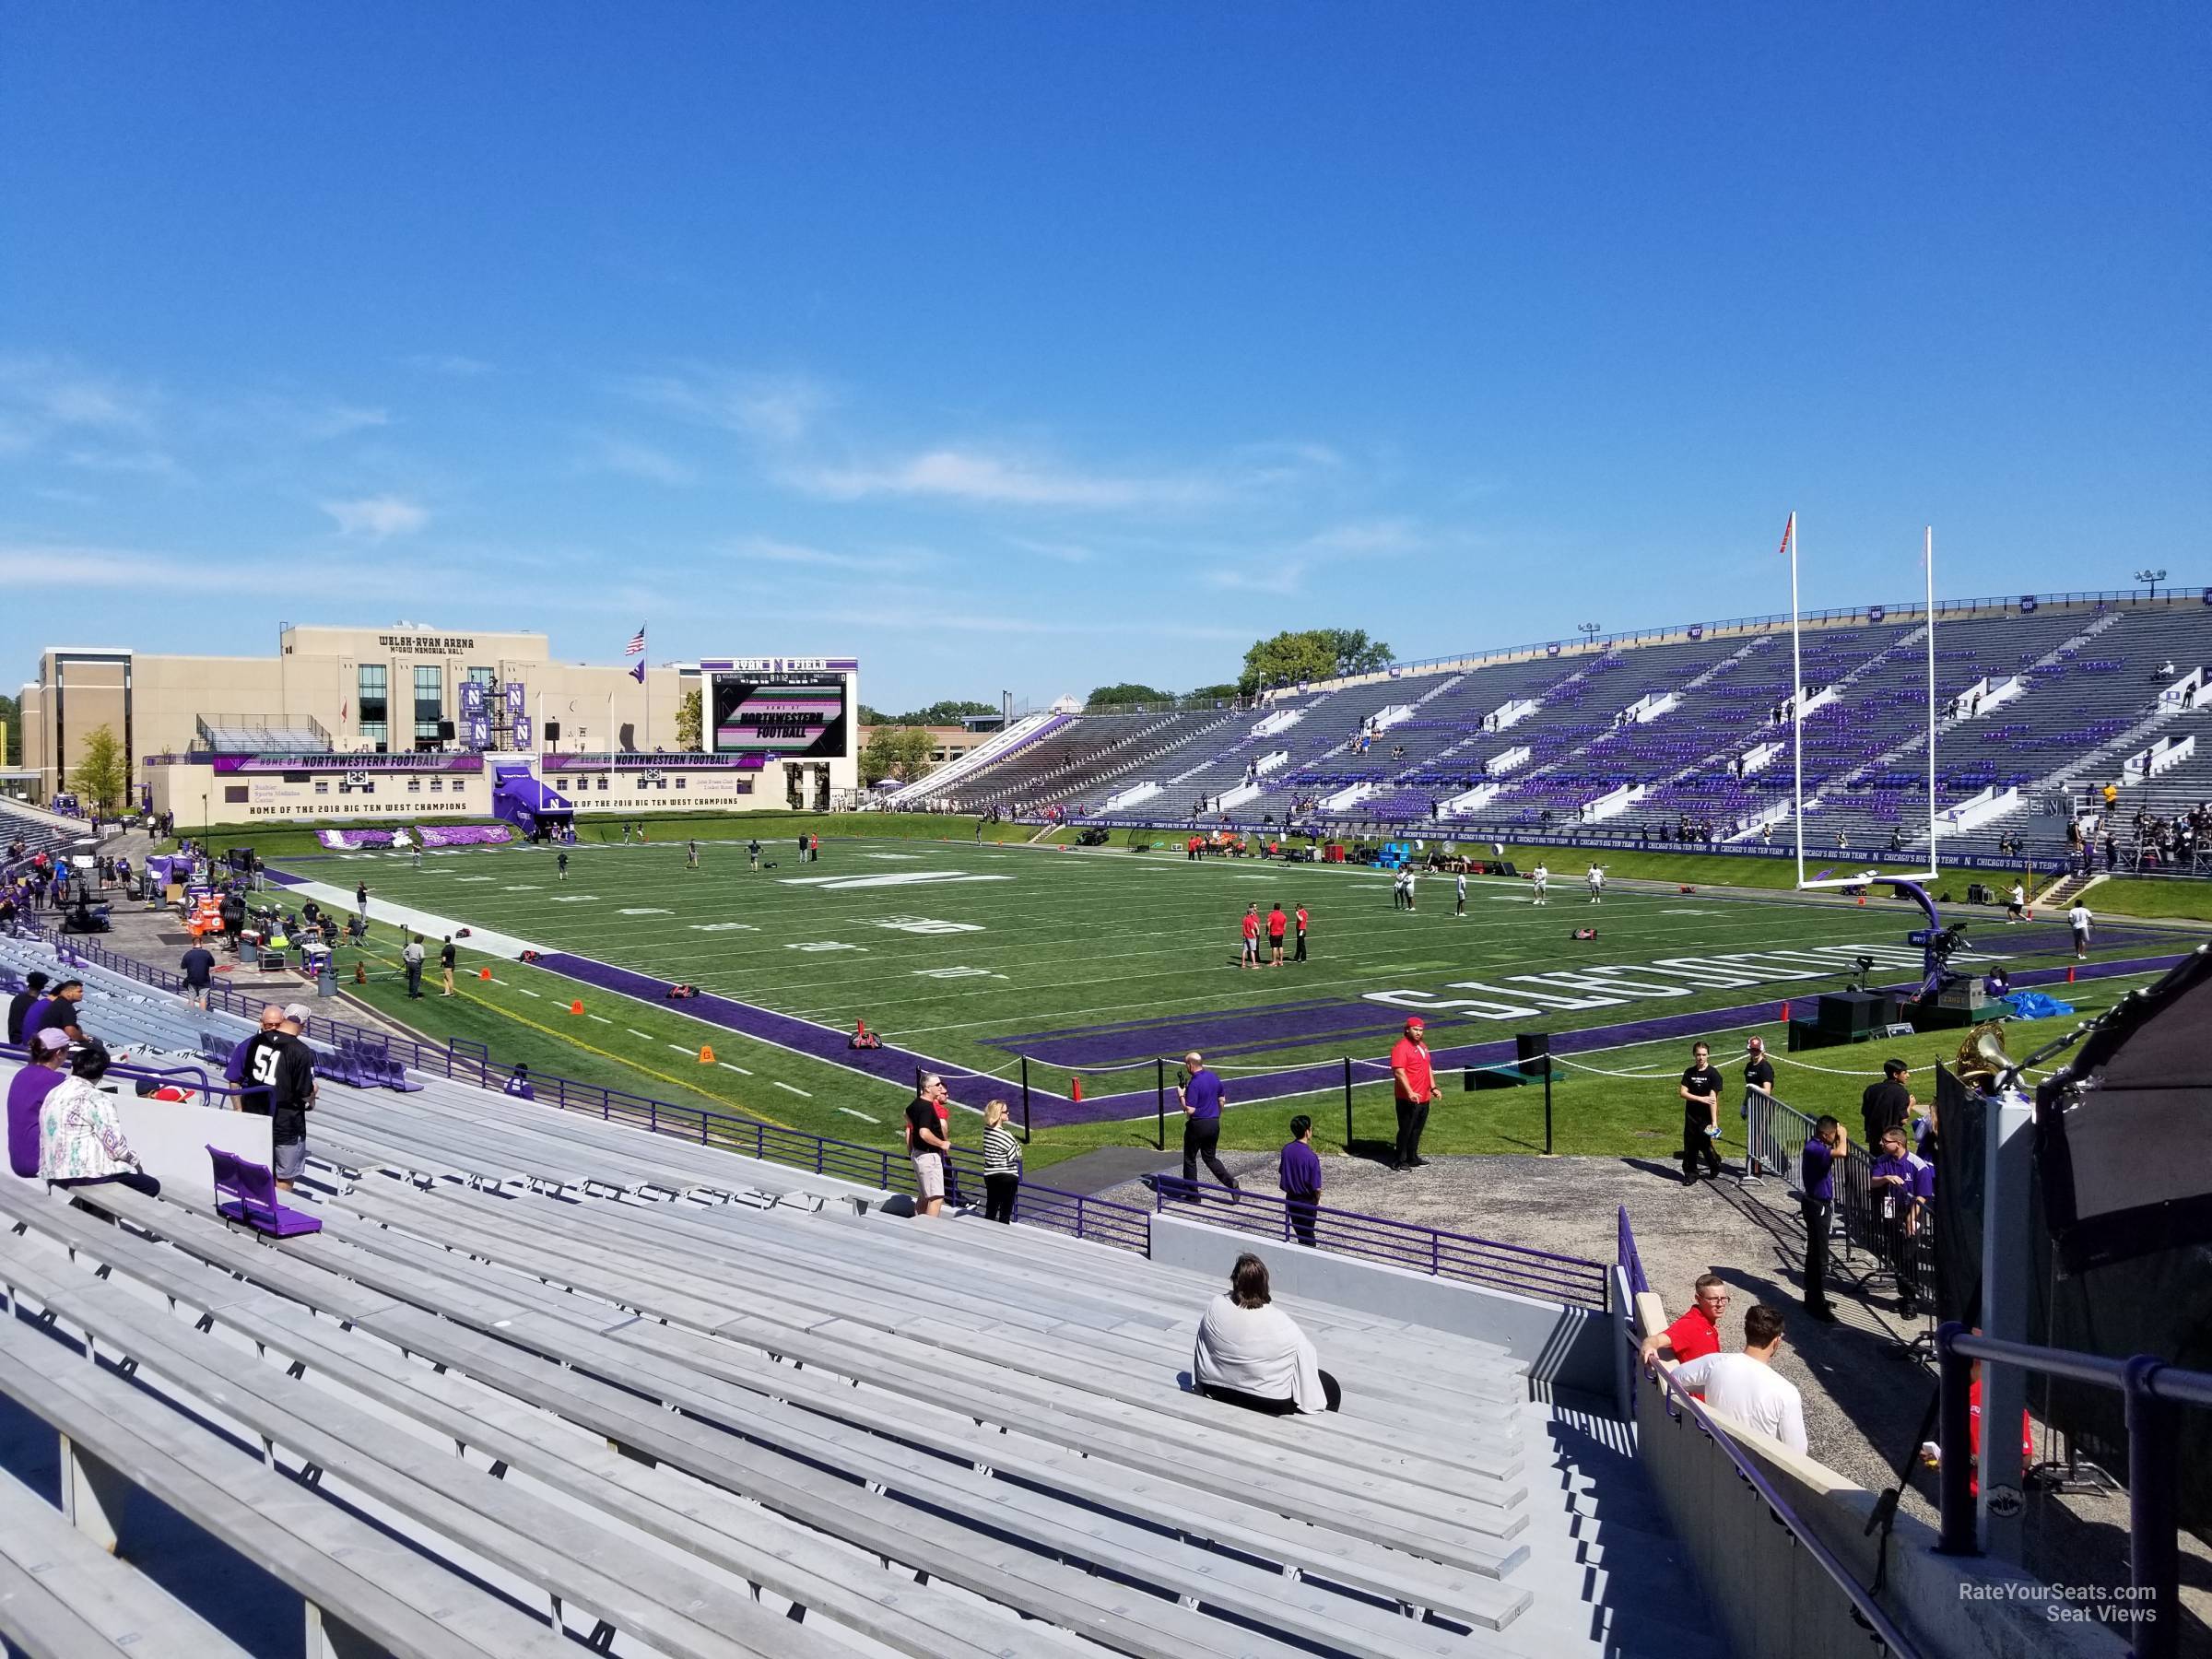 section 122, row 22 seat view  - ryan field